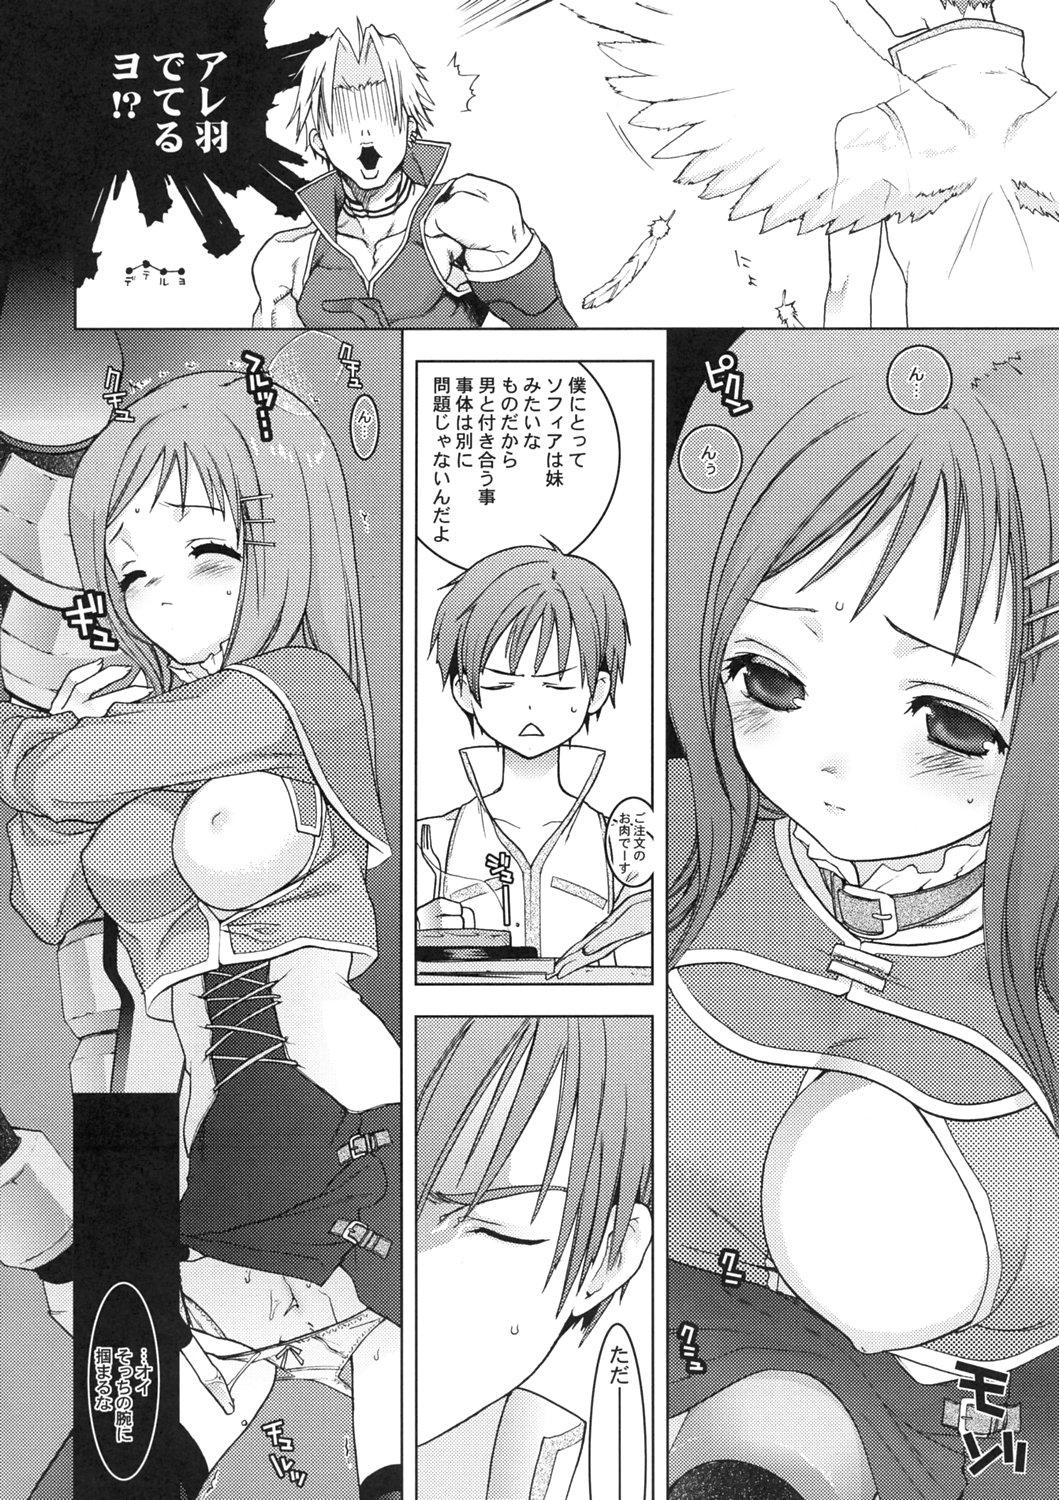 Spank 108 Candys 3.5 - Star ocean 3 Hot Mom - Page 7